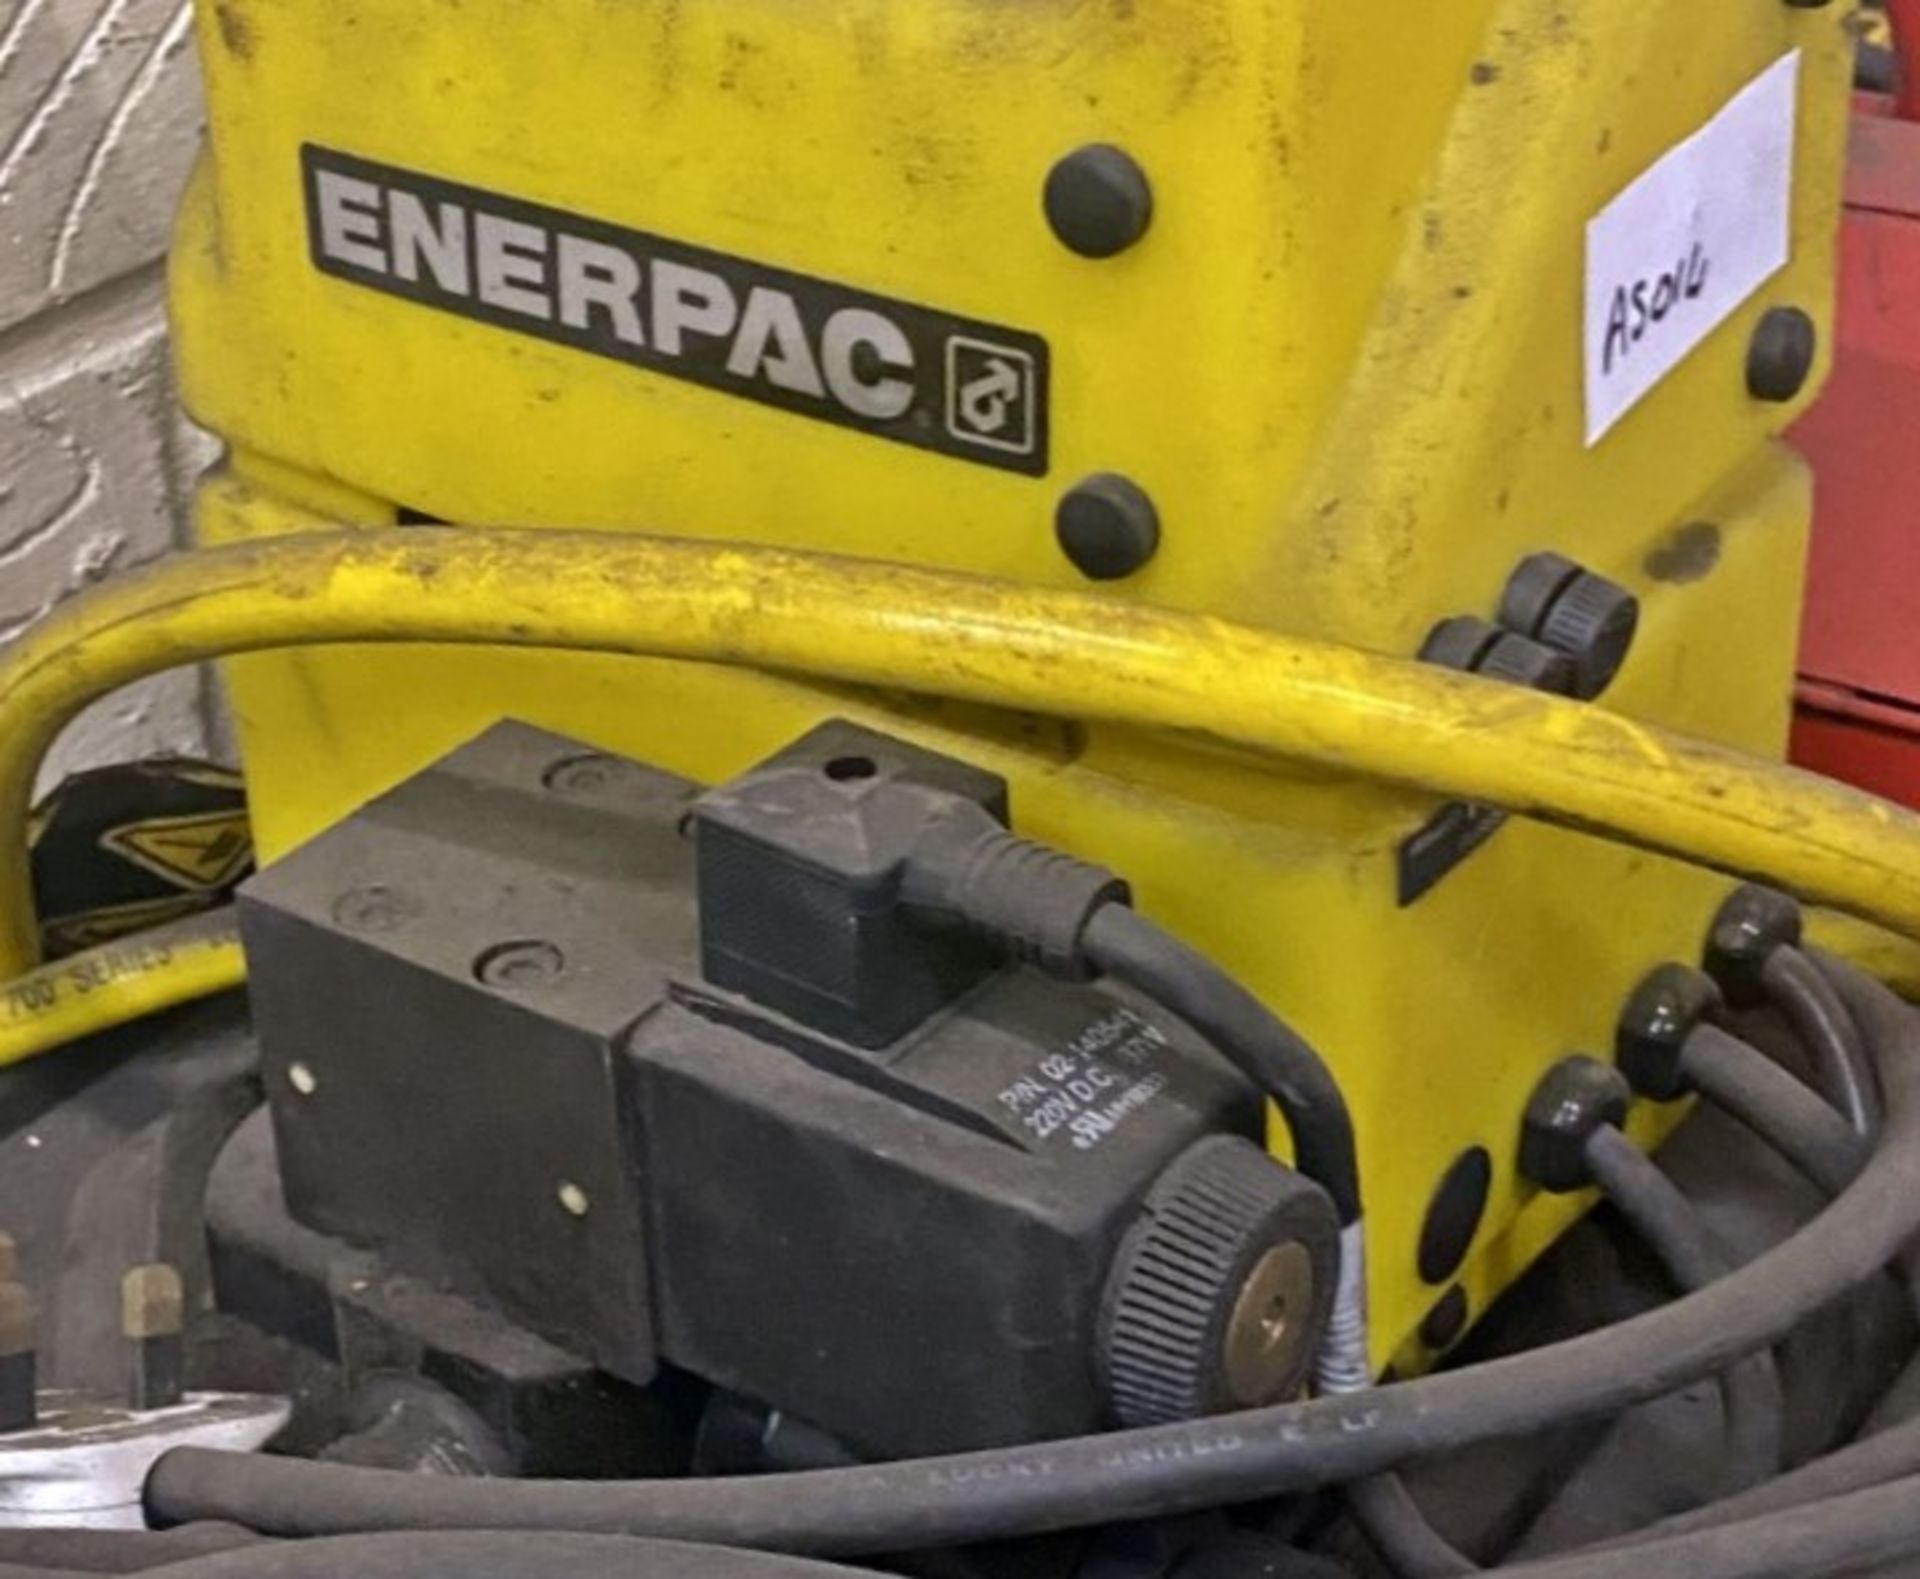 1 x Electric Spring Making Tool by Enerpac - Mounted on an Enerpac Bench - Image 3 of 4